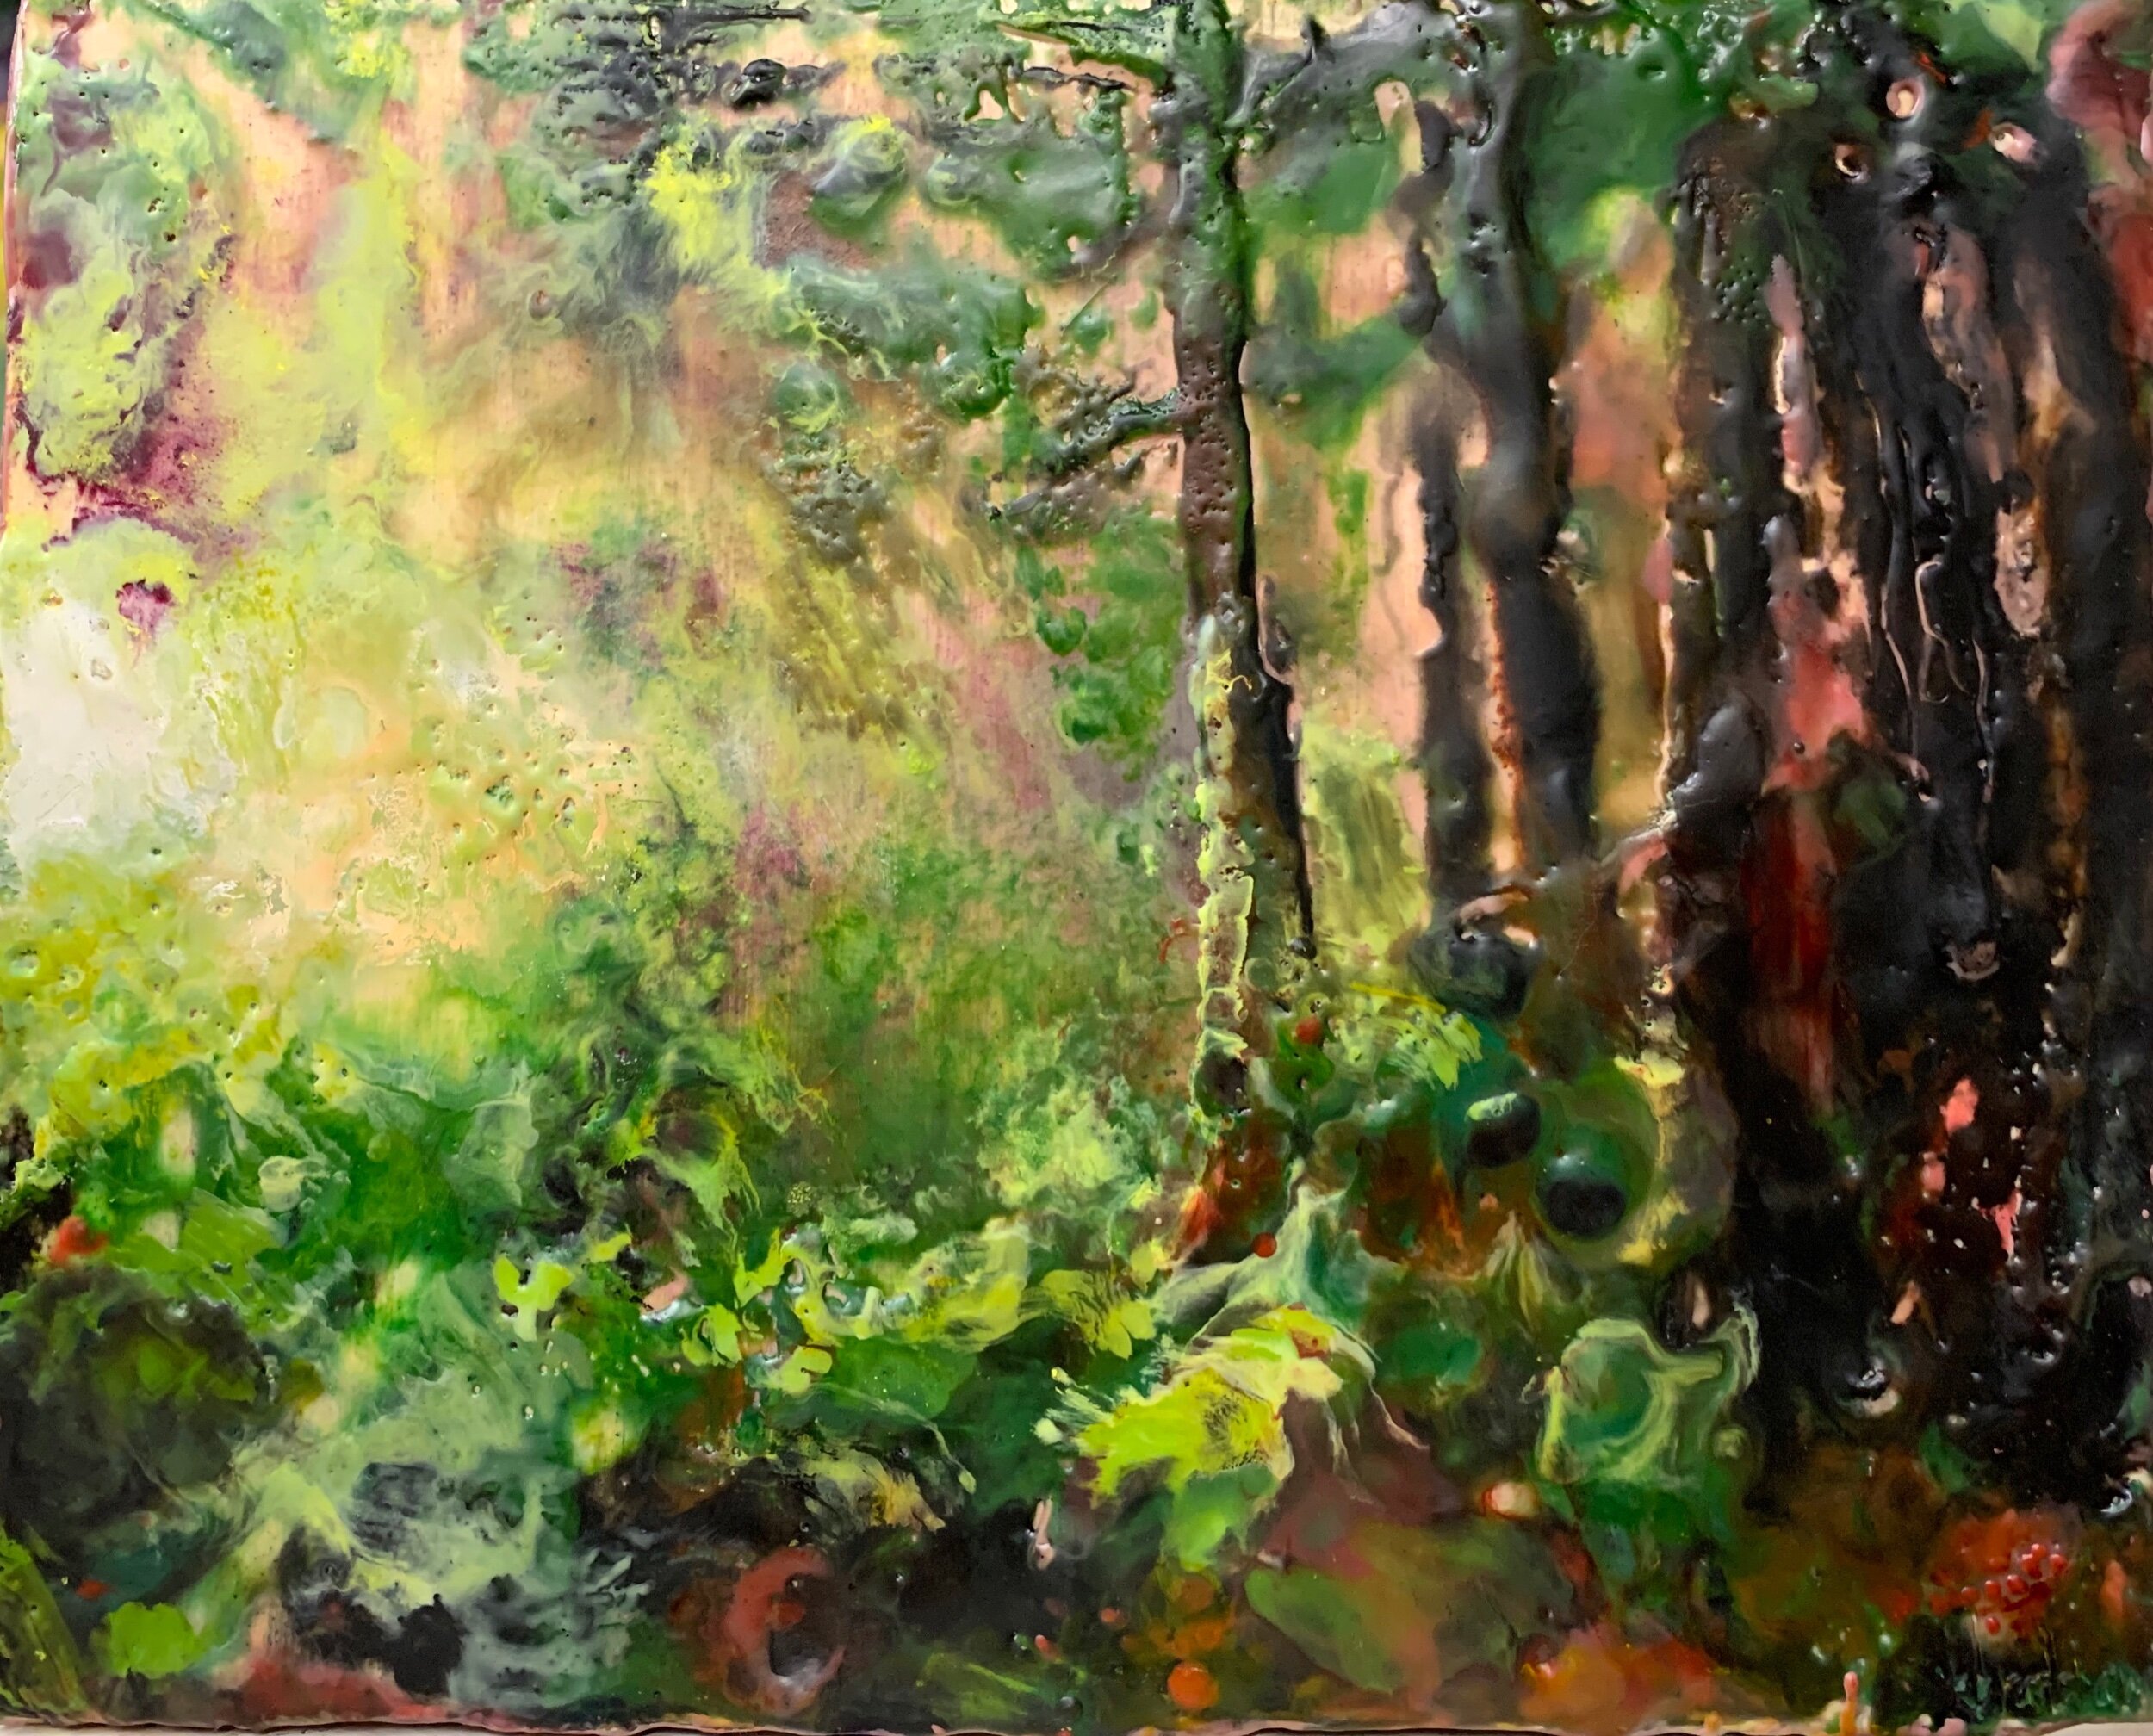 “Forest Glory”